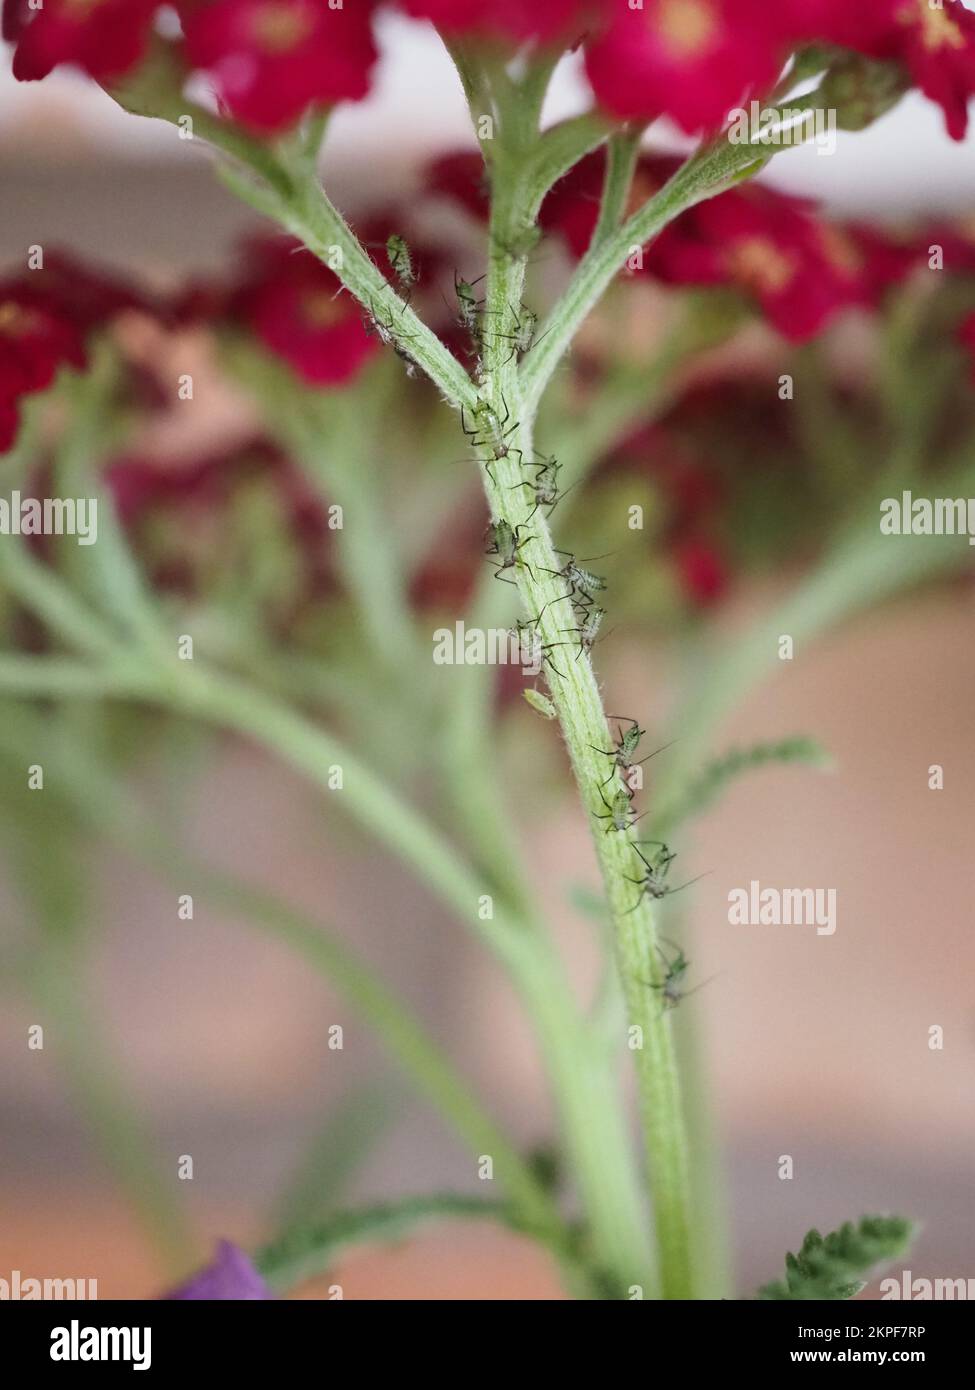 Close up of yarrow aphids (Microsiphoniella millefolii) on an Achillea plant stem Stock Photo